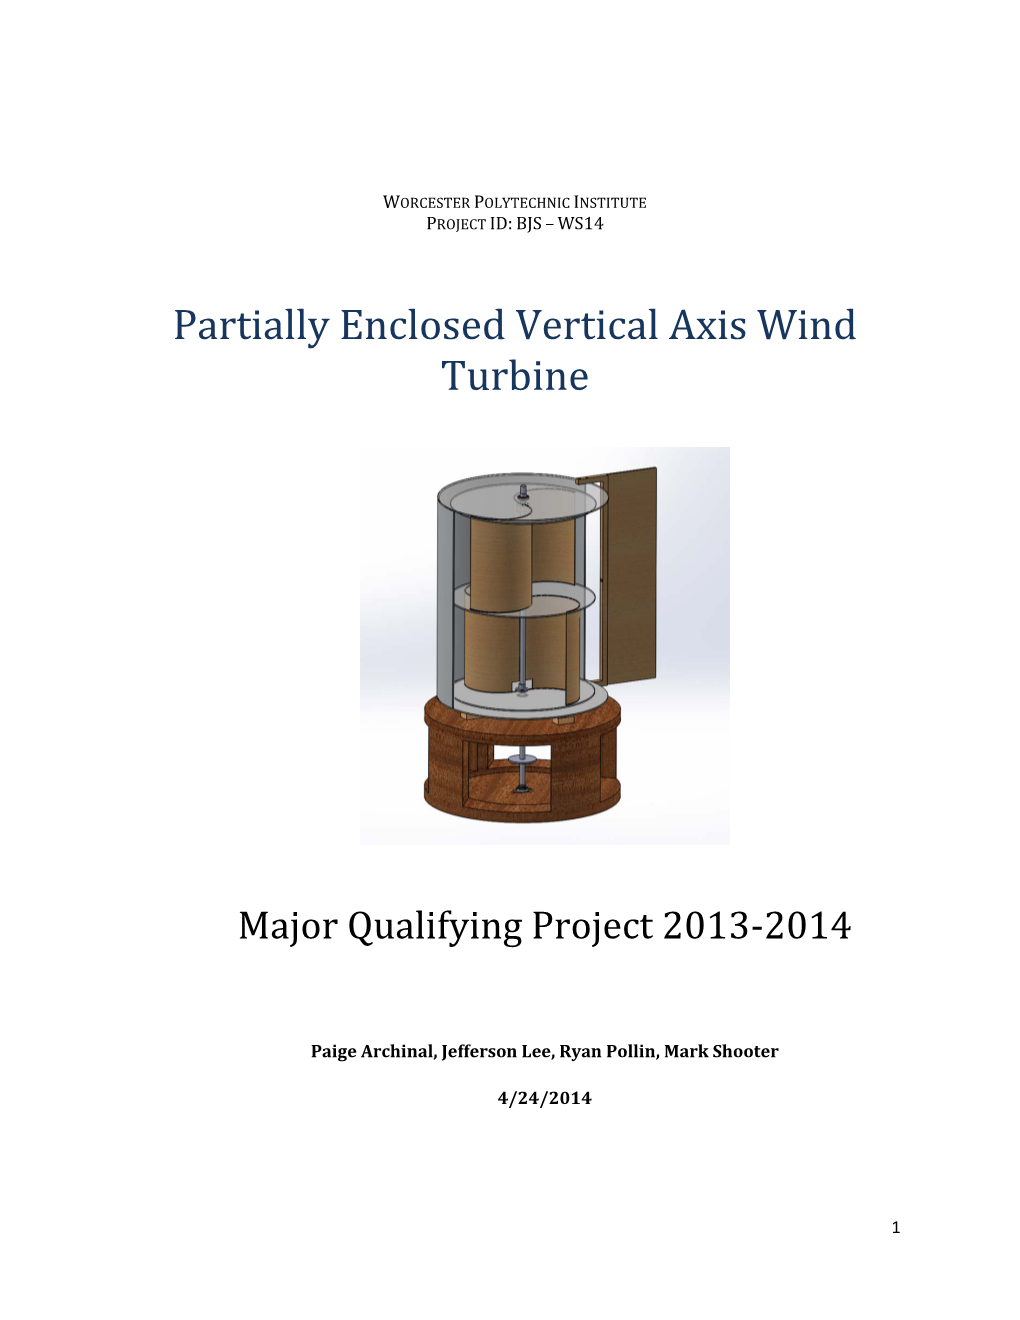 Partially Enclosed Vertical Axis Wind Turbine